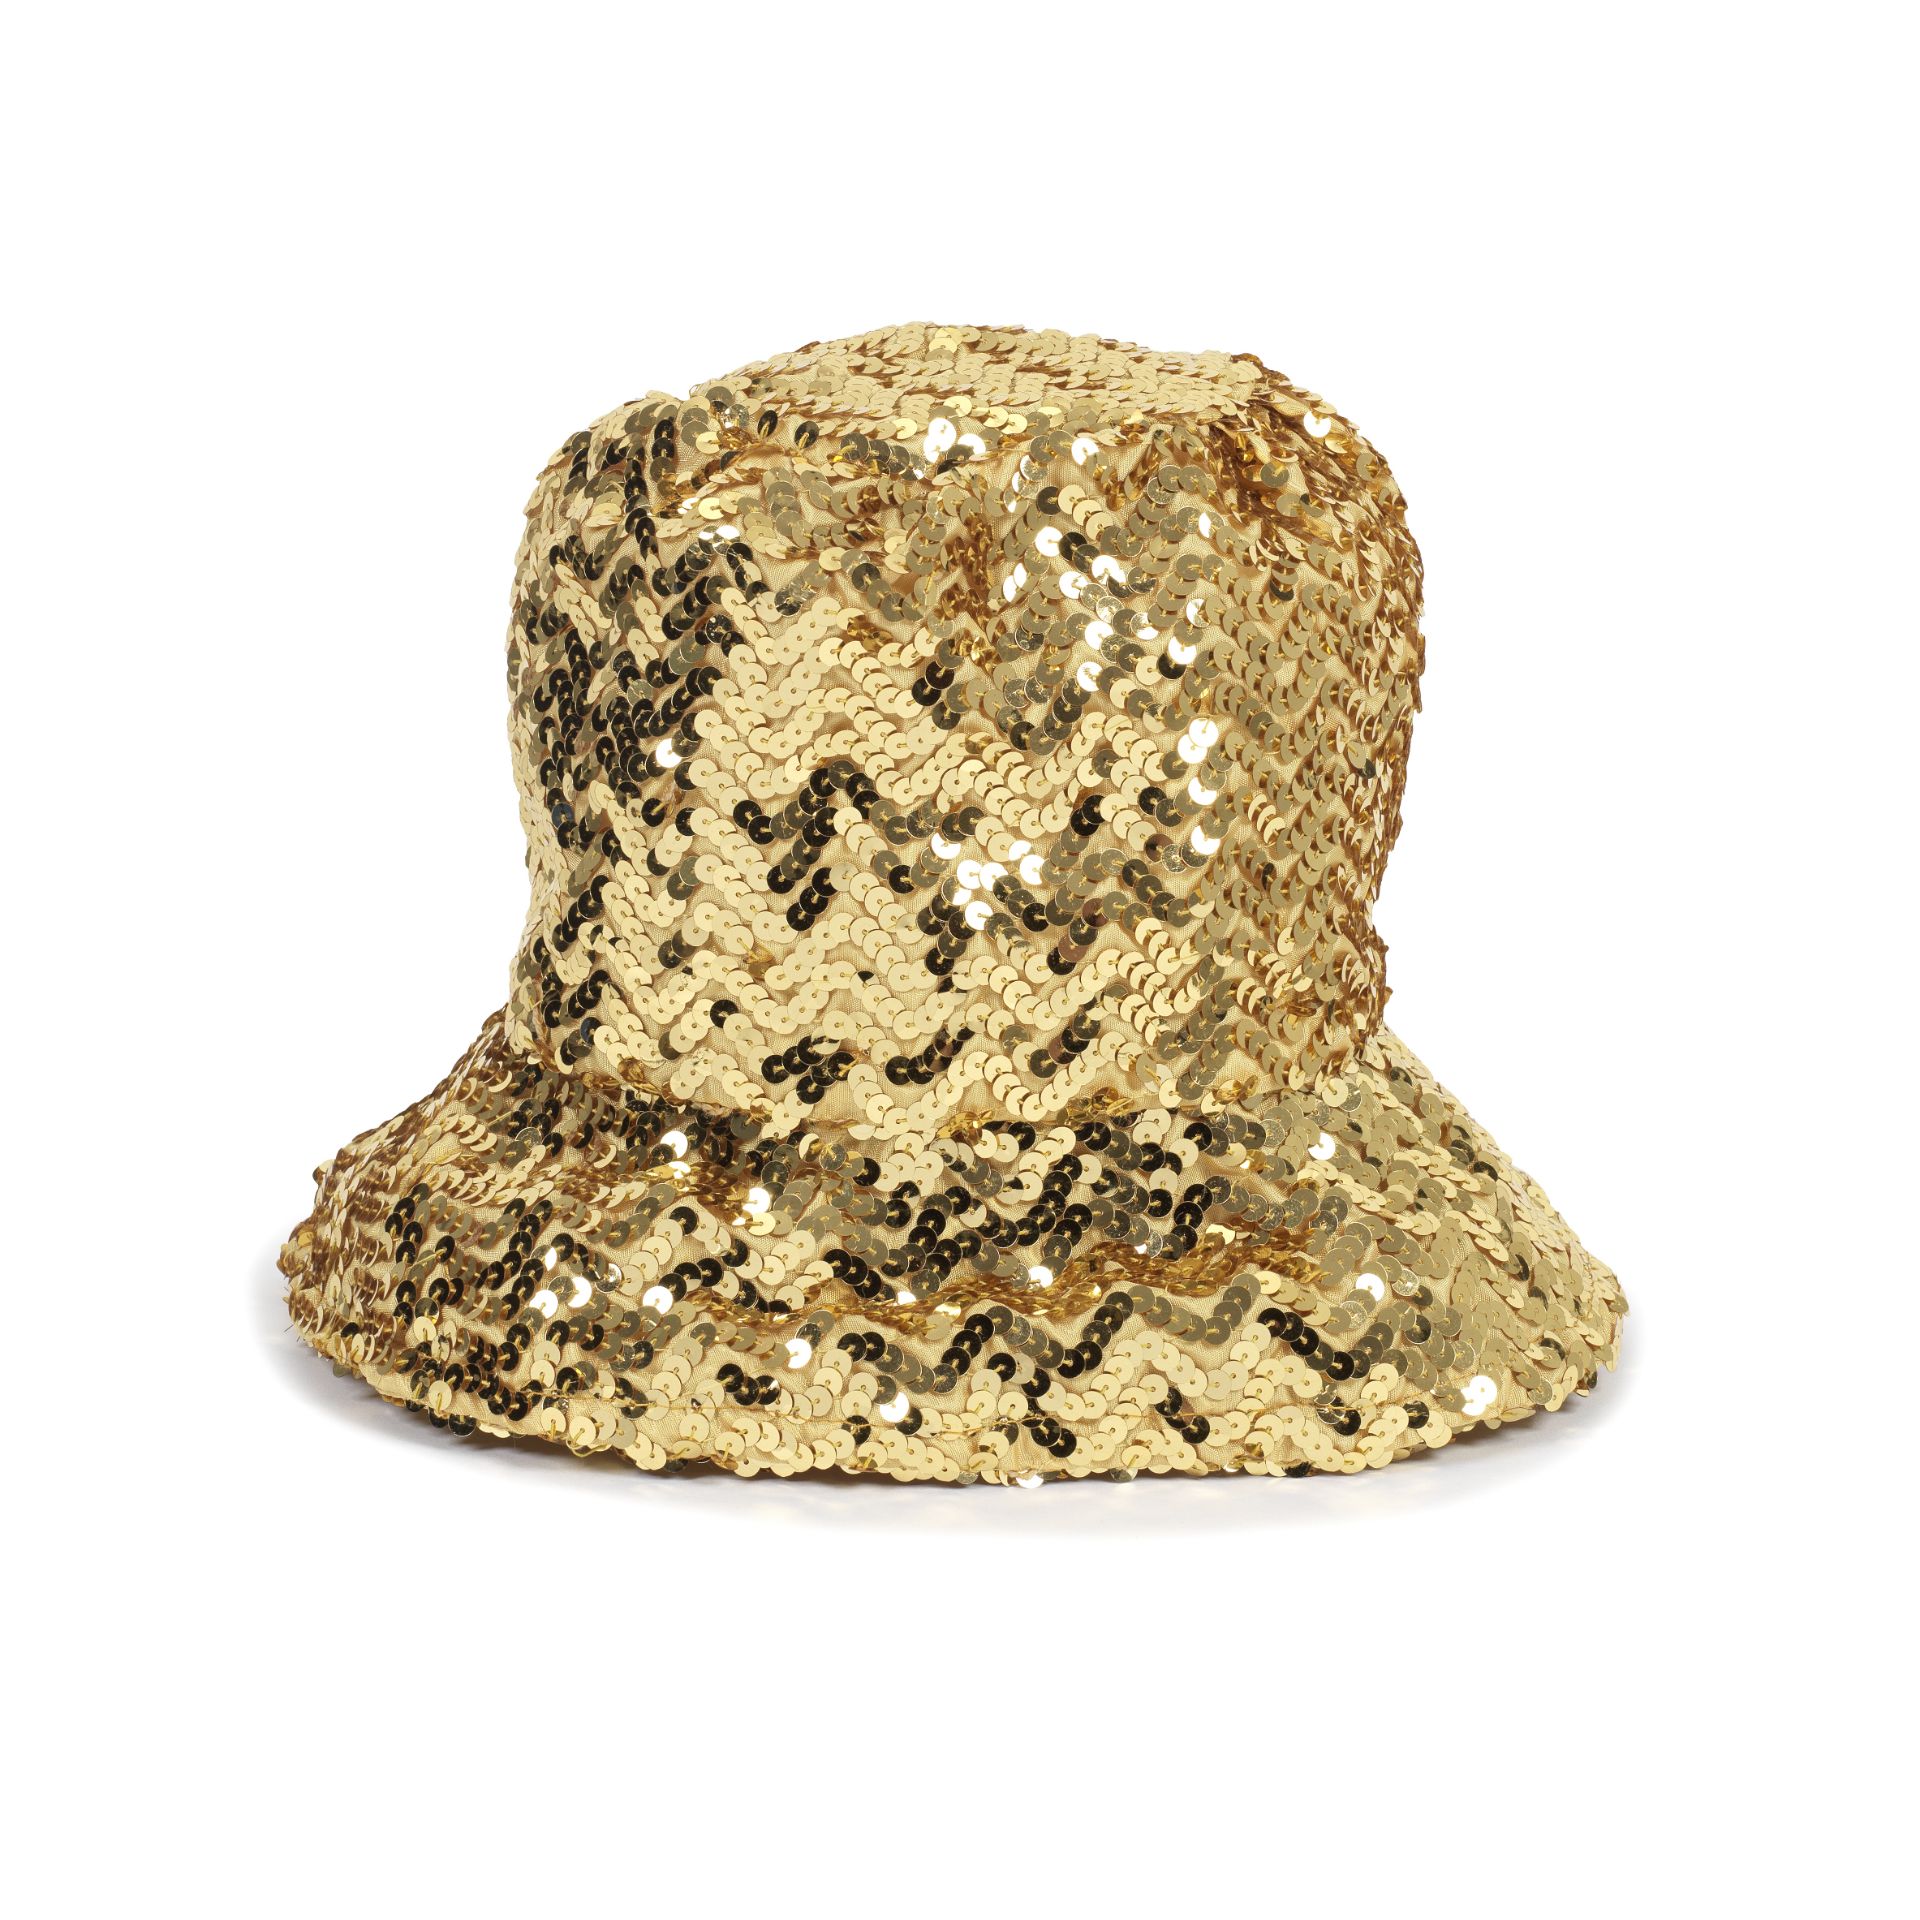 Kylie Minogue: A Sequined Hat Worn by Kylie on the Album Cover for Enjoy Yourself, 1989, 2